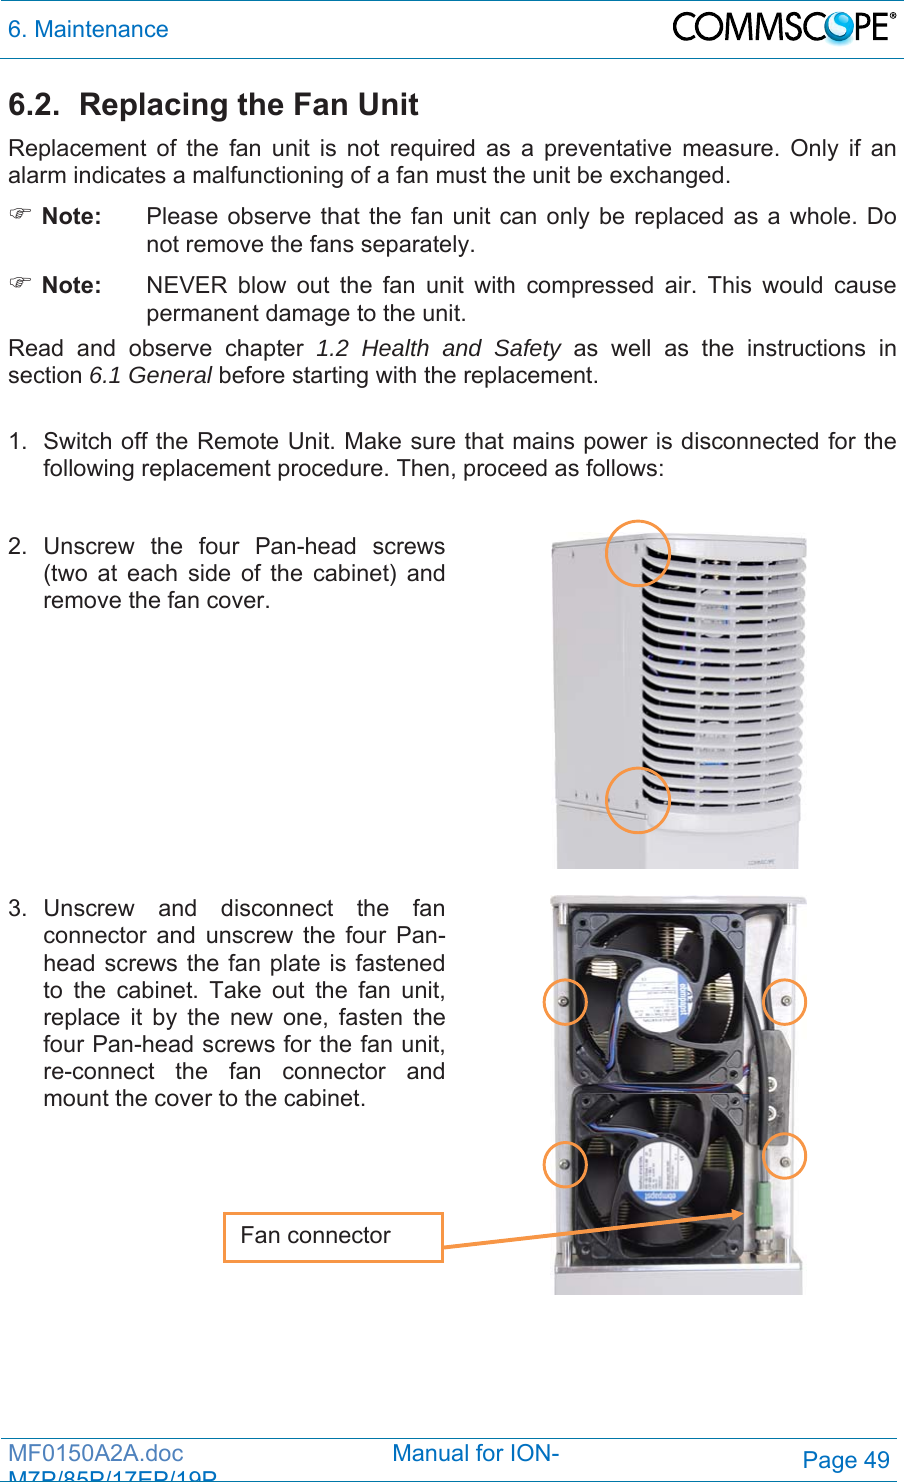 6. Maintenance  MF0150A2A.doc                                Manual for ION-M7P/85P/17EP/19PPage 49 6.2.  Replacing the Fan Unit Replacement of the fan unit is not required as a preventative measure. Only if an alarm indicates a malfunctioning of a fan must the unit be exchanged.  Note:  Please observe that the fan unit can only be replaced as a whole. Do not remove the fans separately.  Note:  NEVER blow out the fan unit with compressed air. This would cause permanent damage to the unit. Read and observe chapter 1.2 Health and Safety as well as the instructions in section 6.1 General before starting with the replacement.   1.  Switch off the Remote Unit. Make sure that mains power is disconnected for the following replacement procedure. Then, proceed as follows:  2. Unscrew the four Pan-head screws (two at each side of the cabinet) and remove the fan cover.     3. Unscrew and disconnect the fan connector and unscrew the four Pan-head screws the fan plate is fastened to the cabinet. Take out the fan unit, replace it by the new one, fasten the four Pan-head screws for the fan unit, re-connect the fan connector and mount the cover to the cabinet.     Fan connector 